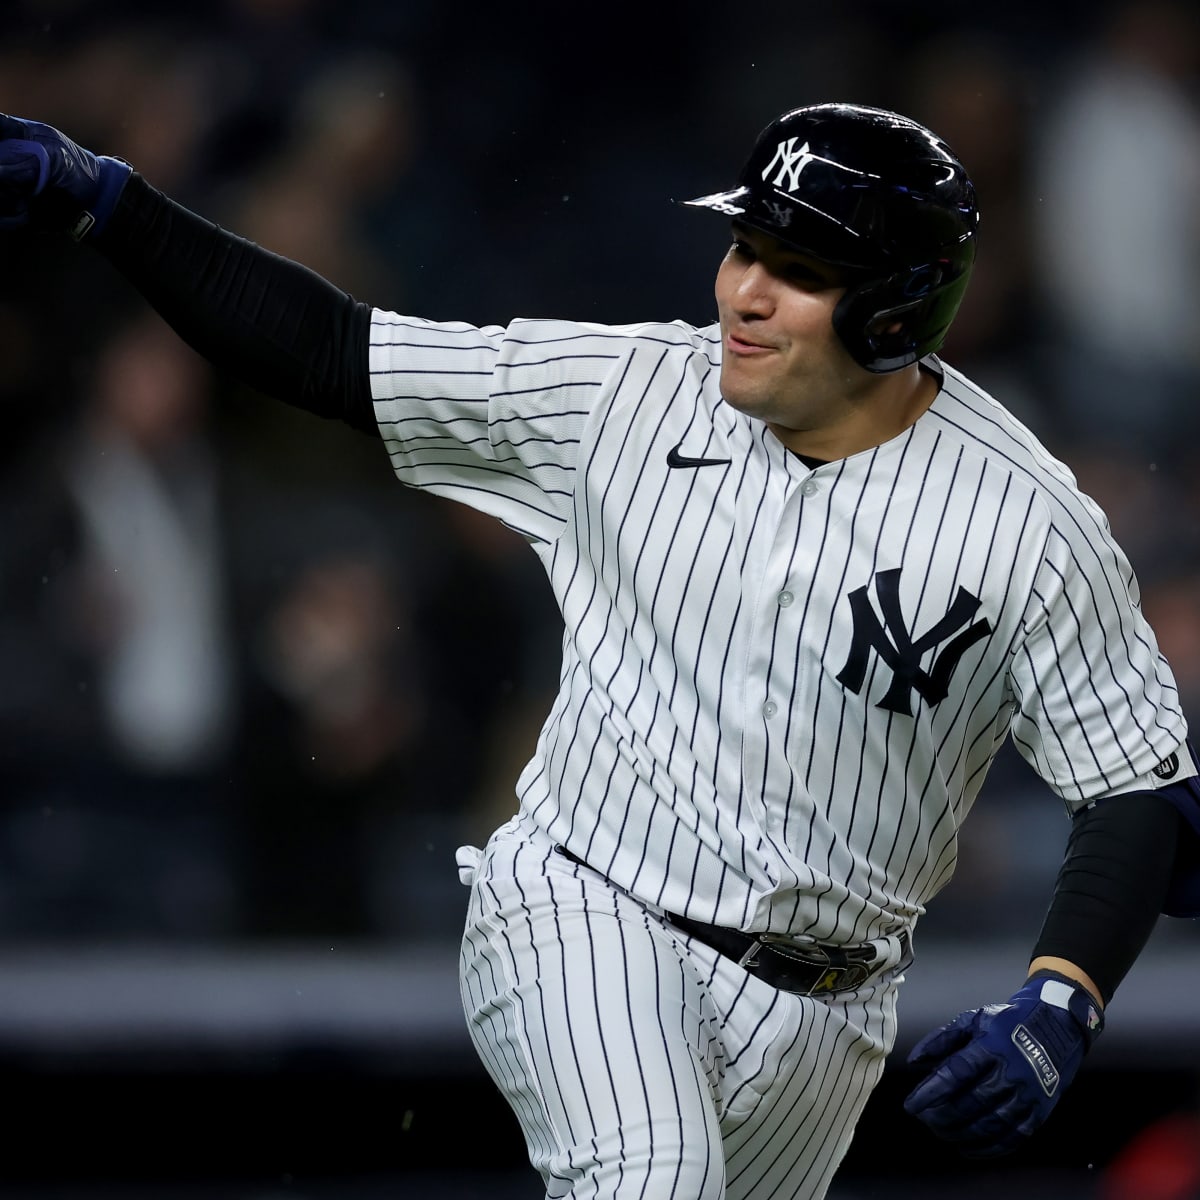 Gold Glove catcher Jose Trevino believes the New York Yankees have